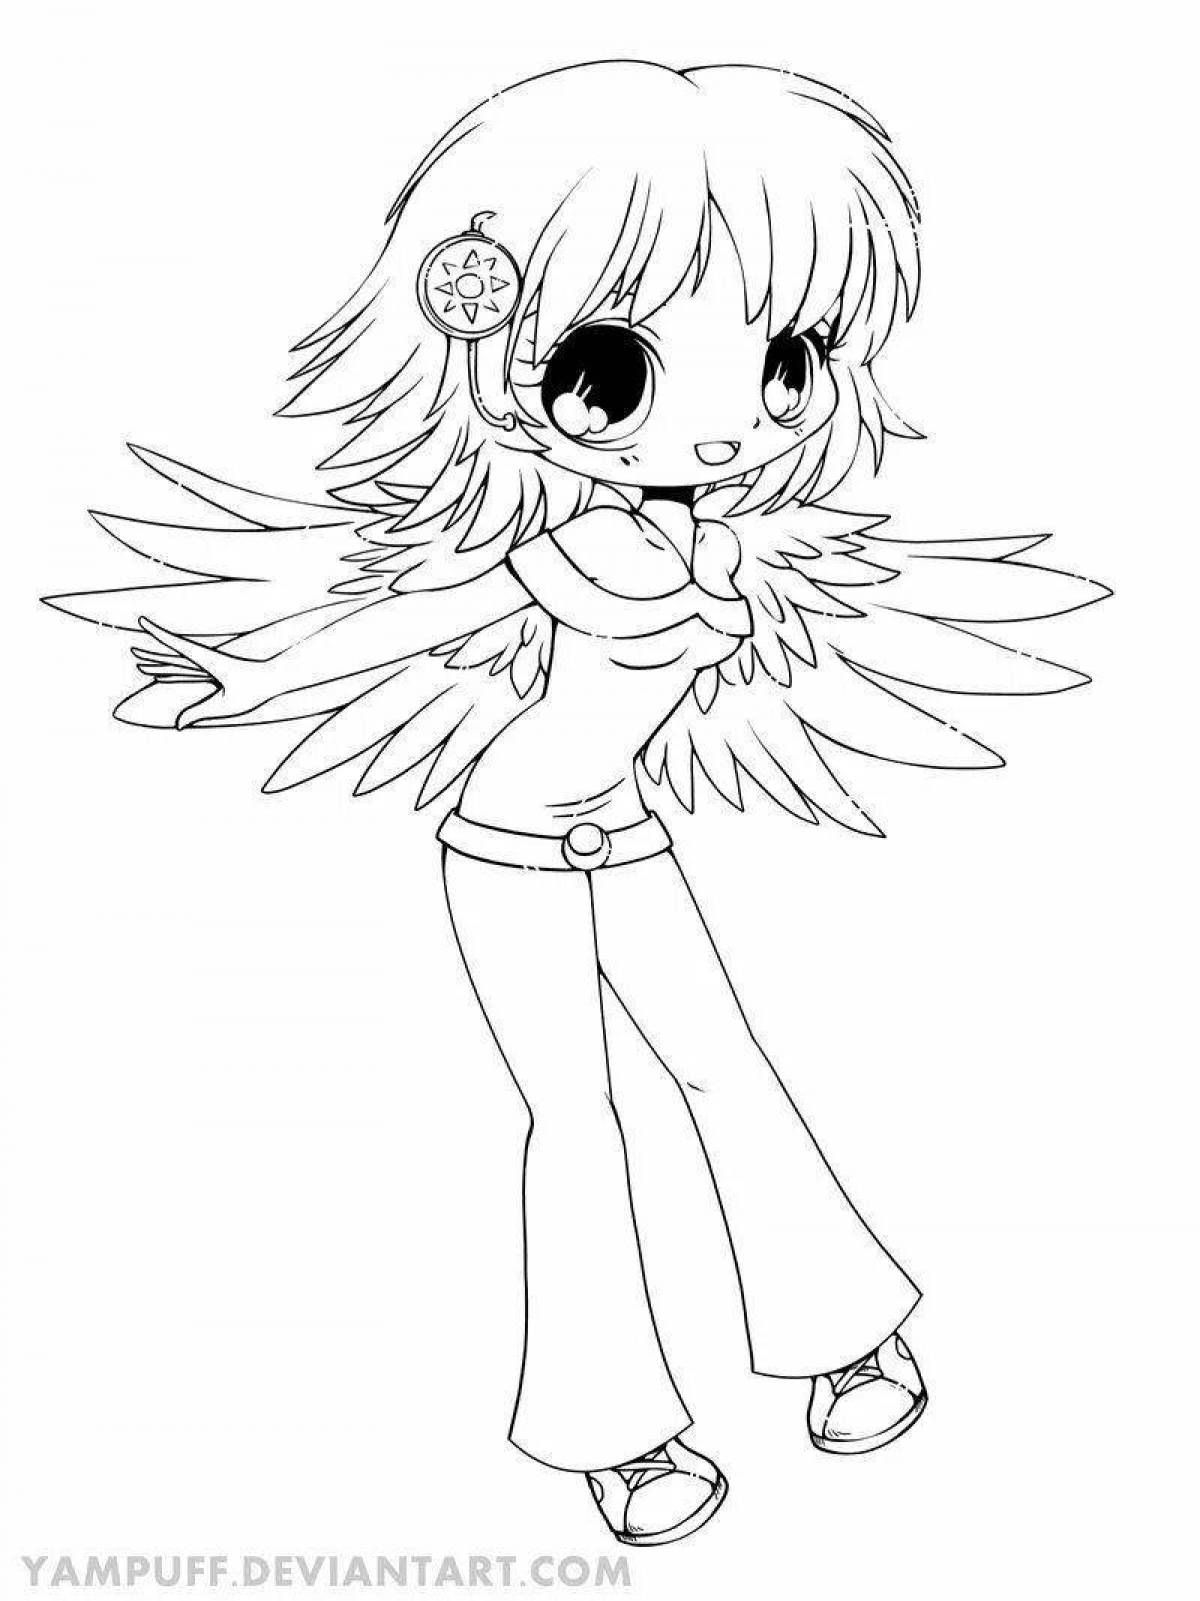 Violent coloring girl with wings